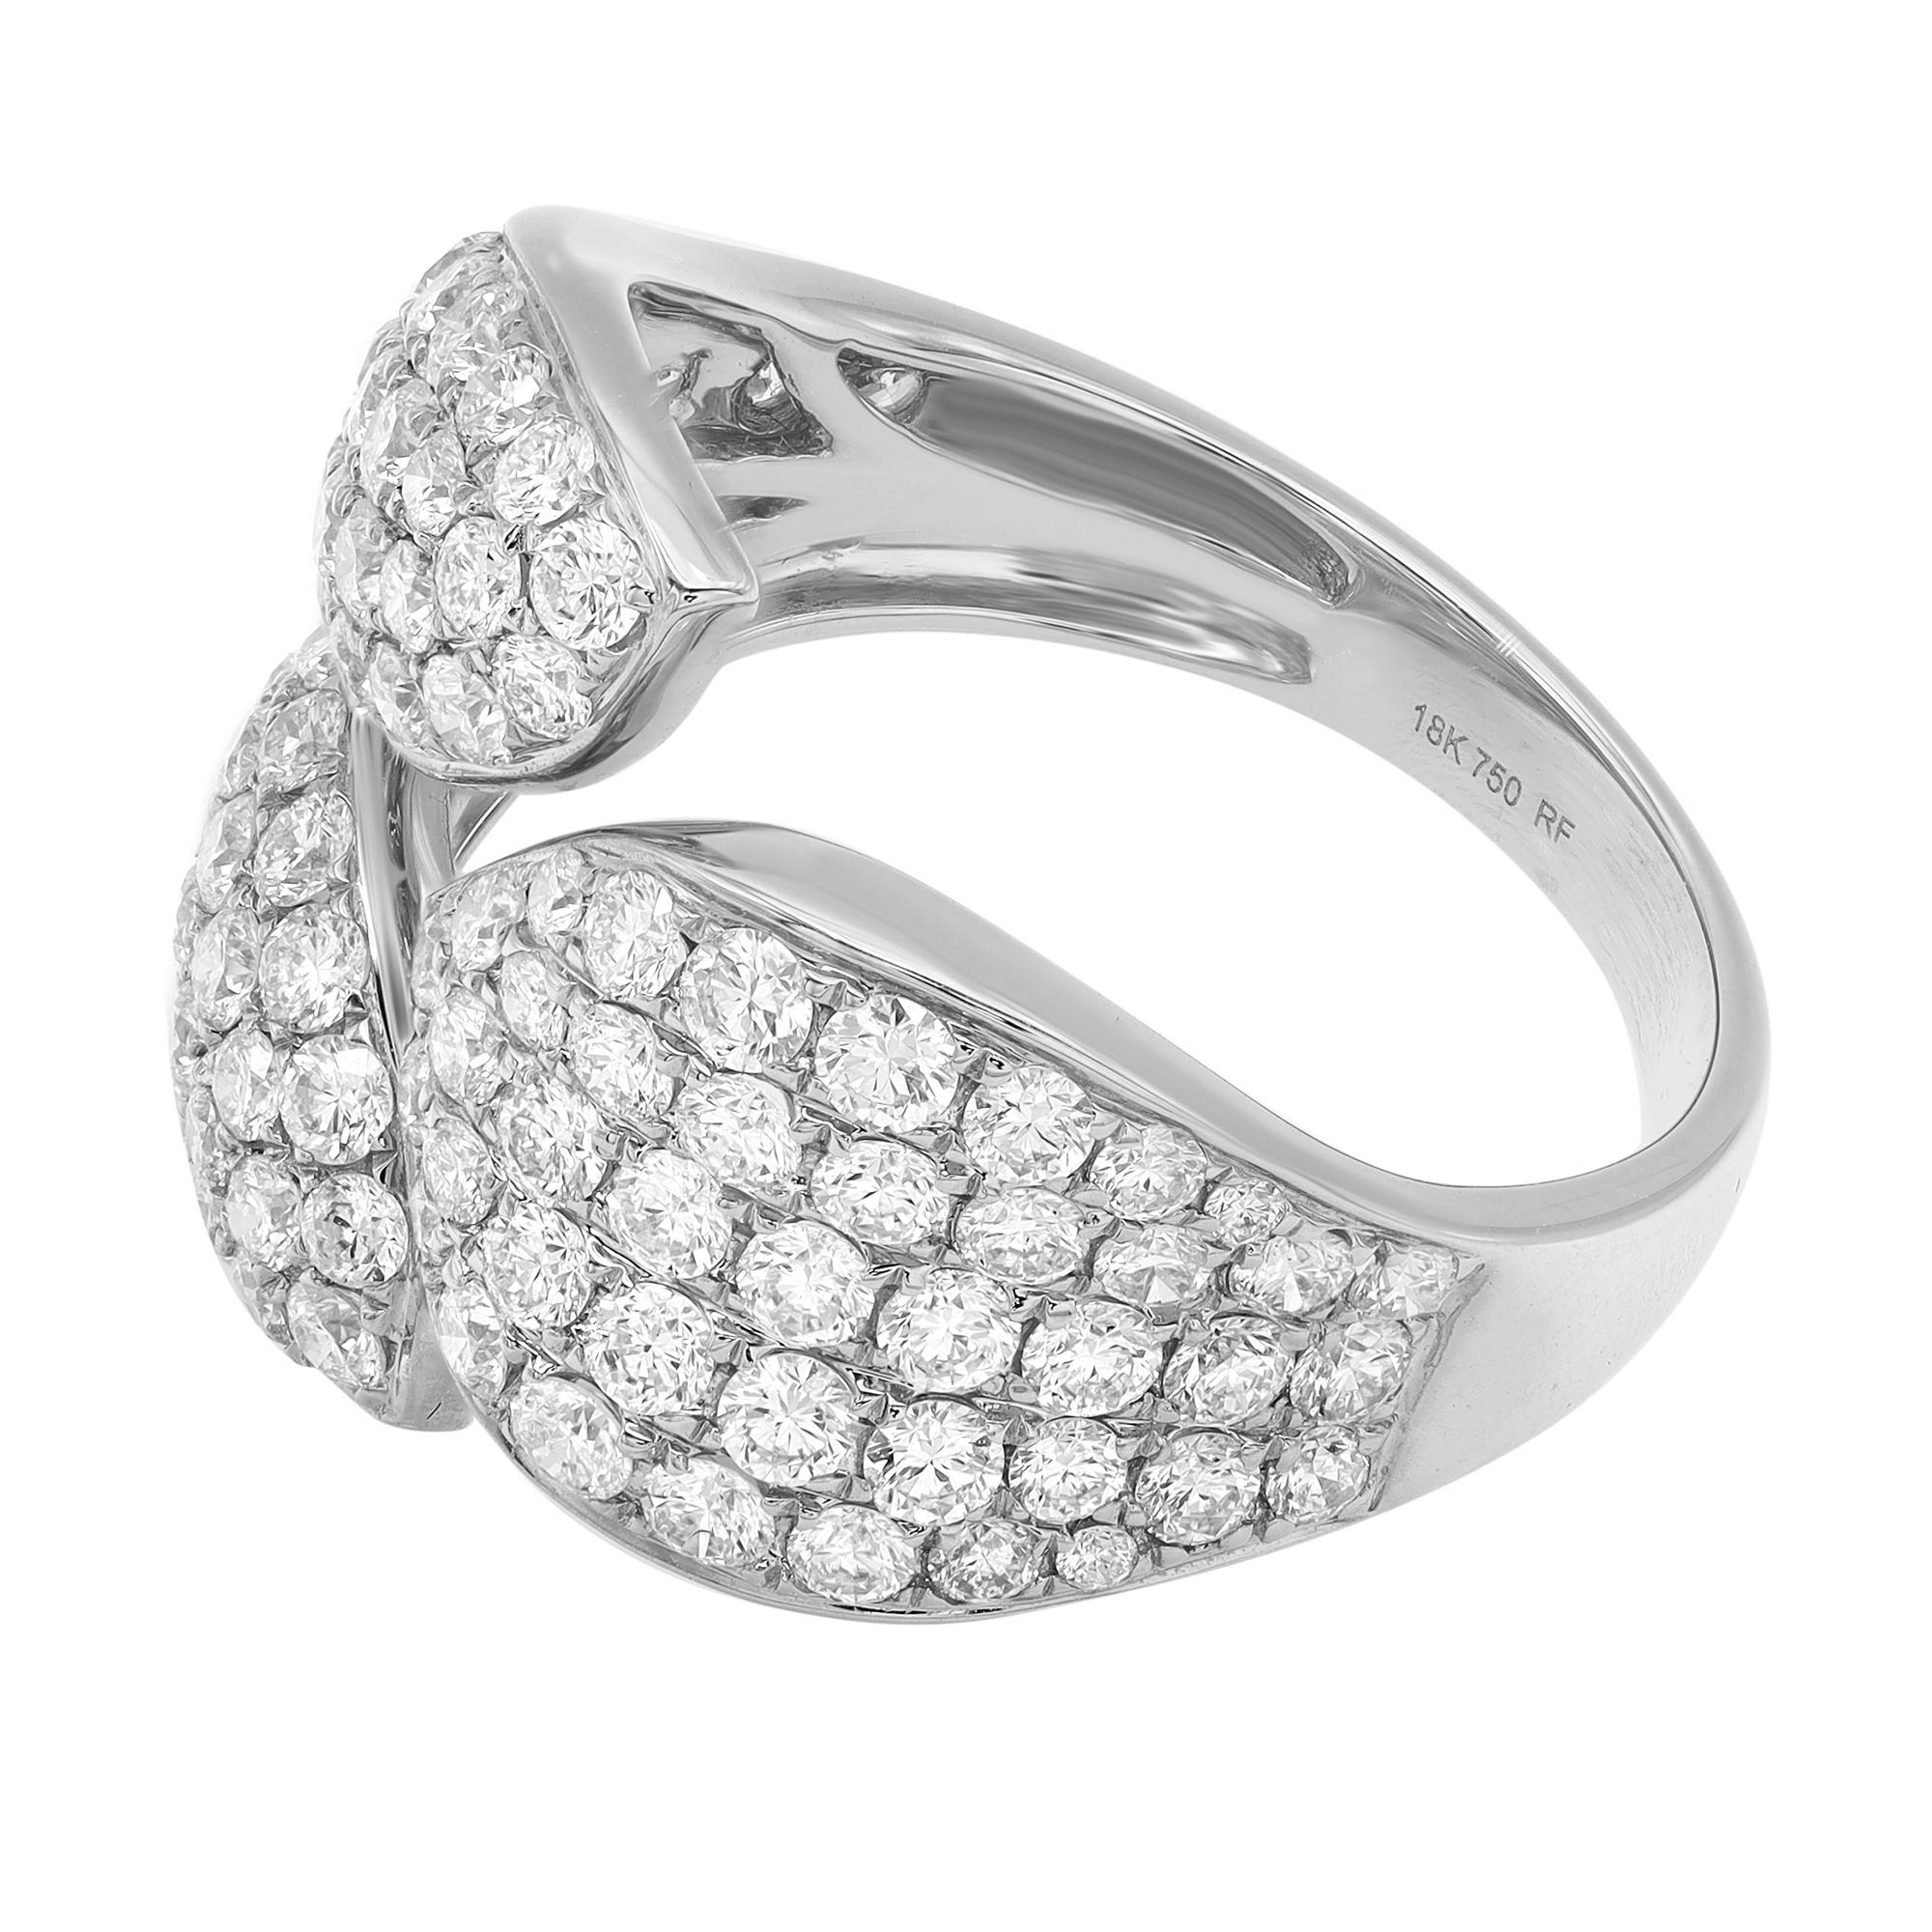 Rachel Koen Pave Set Round Cut Diamond Ring 18K White Gold 2.00Cttw In New Condition For Sale In New York, NY